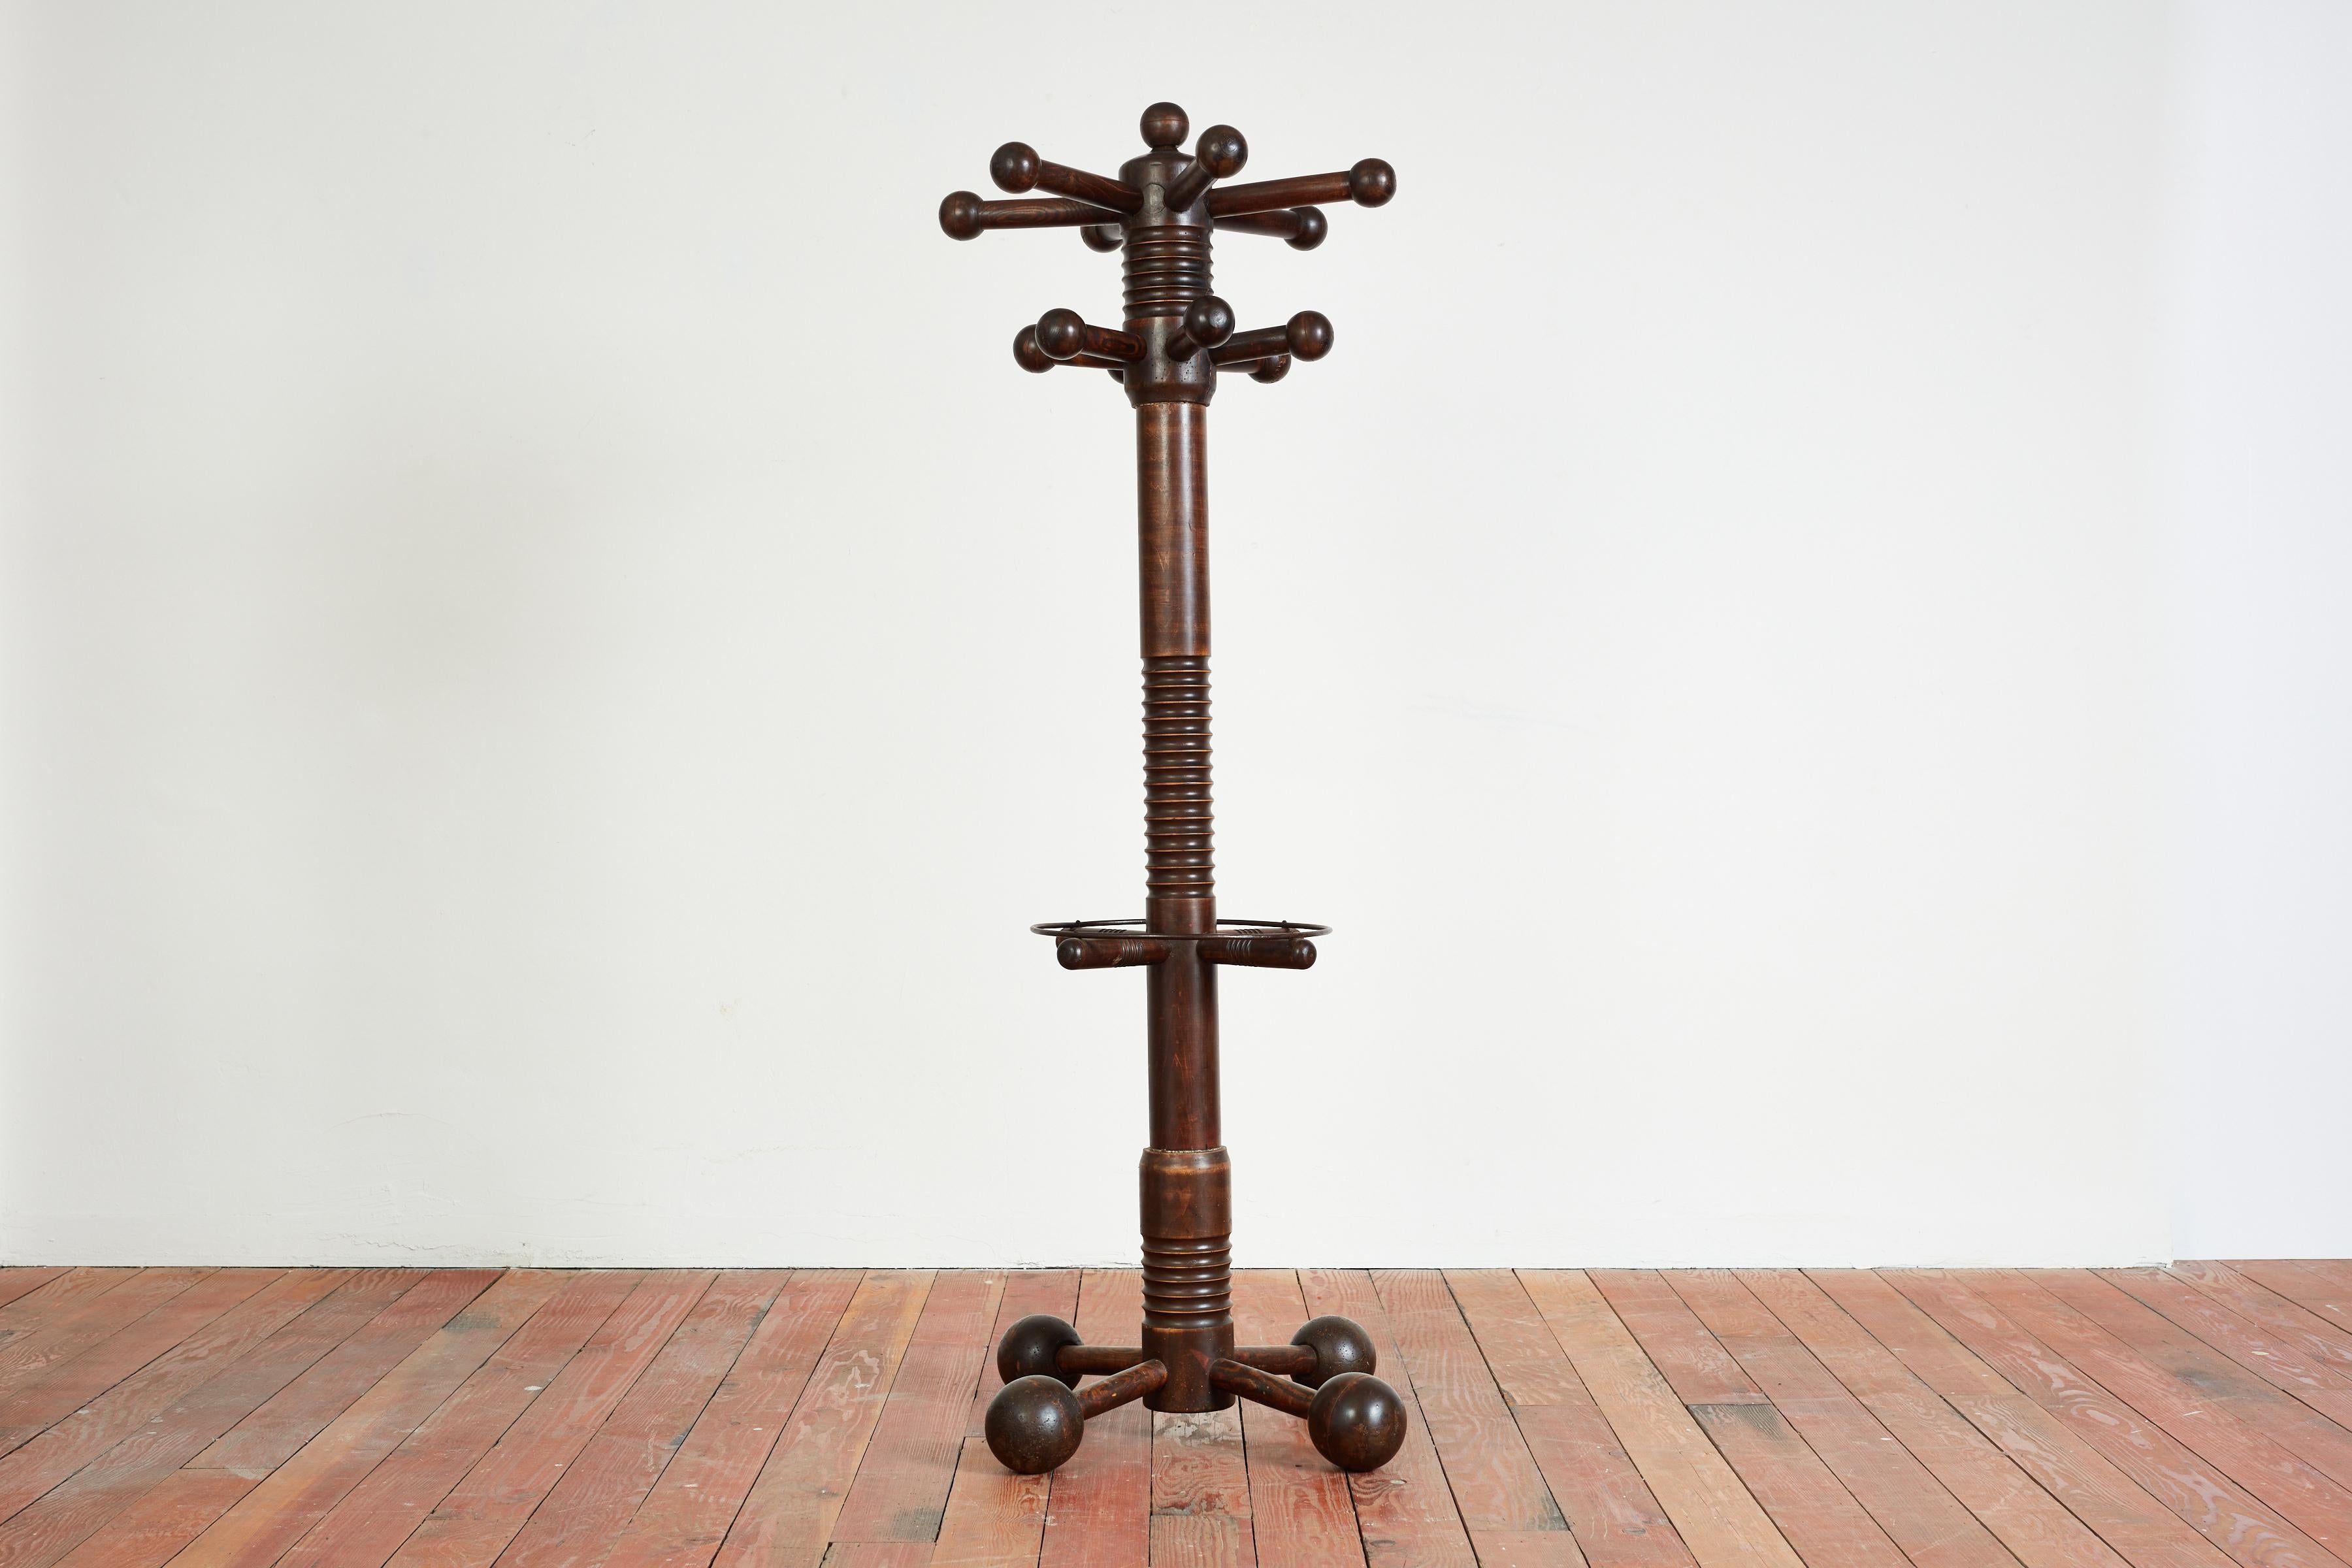 Charles Dudouyt freestanding coatrack with signature bulbous ball tripod base with corkscrew base. 
Two rows of balled coat hooks and metal ring to hold umbrellas / or miscellaneous items. 
Large in scale and extremely well made - a unique piece